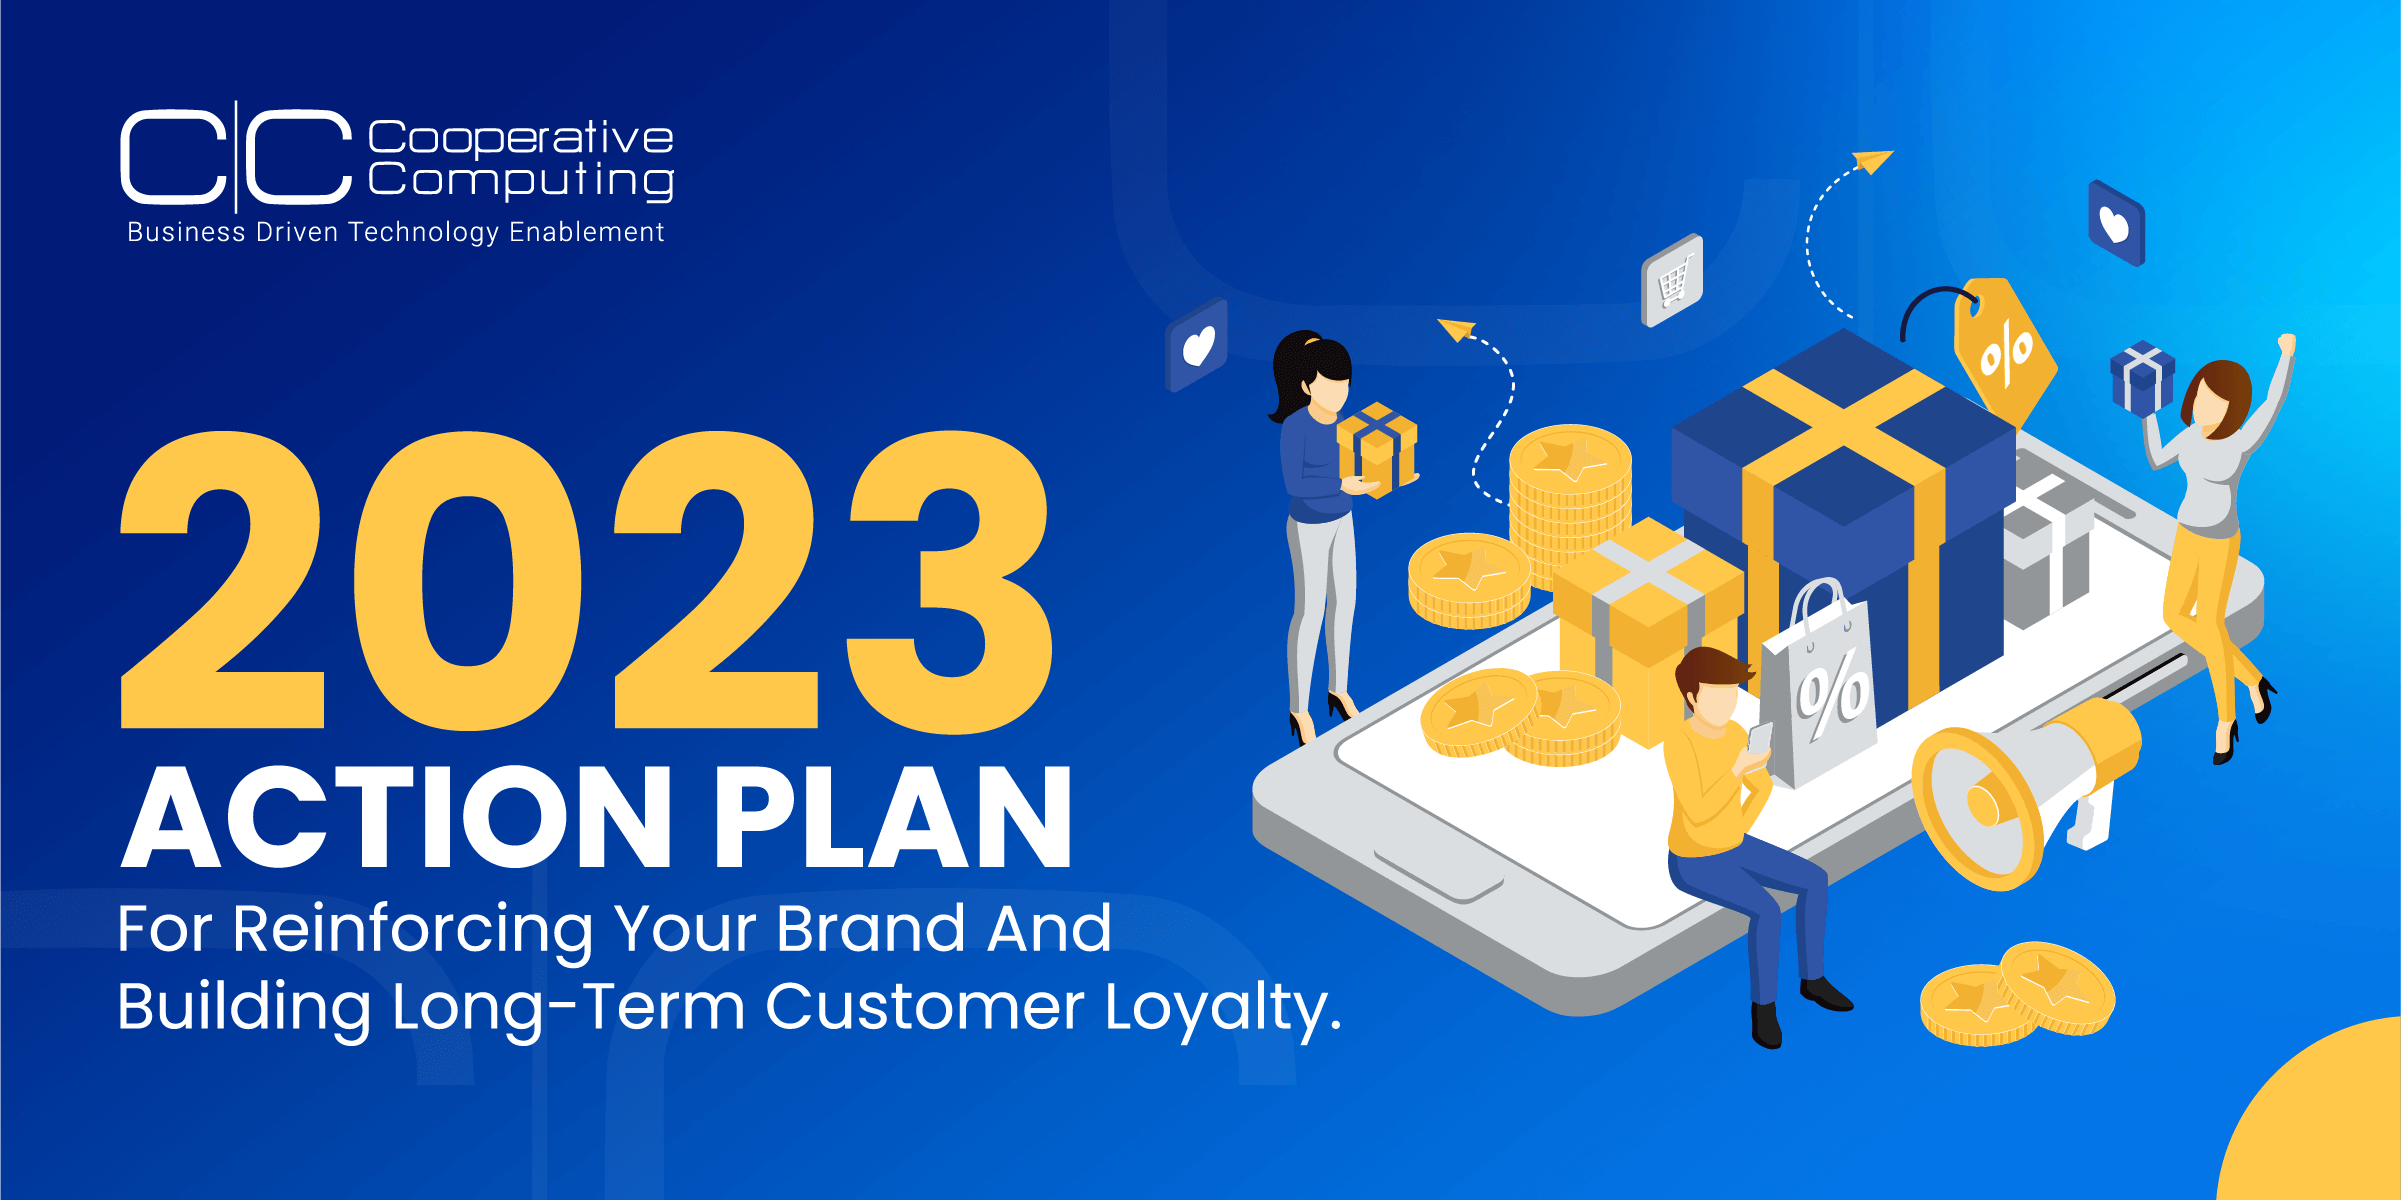 Action Plan 2023 for Reinforcing Your Brand and Building Long-Term Customer Loyalty | Cooperative Computing | Blog